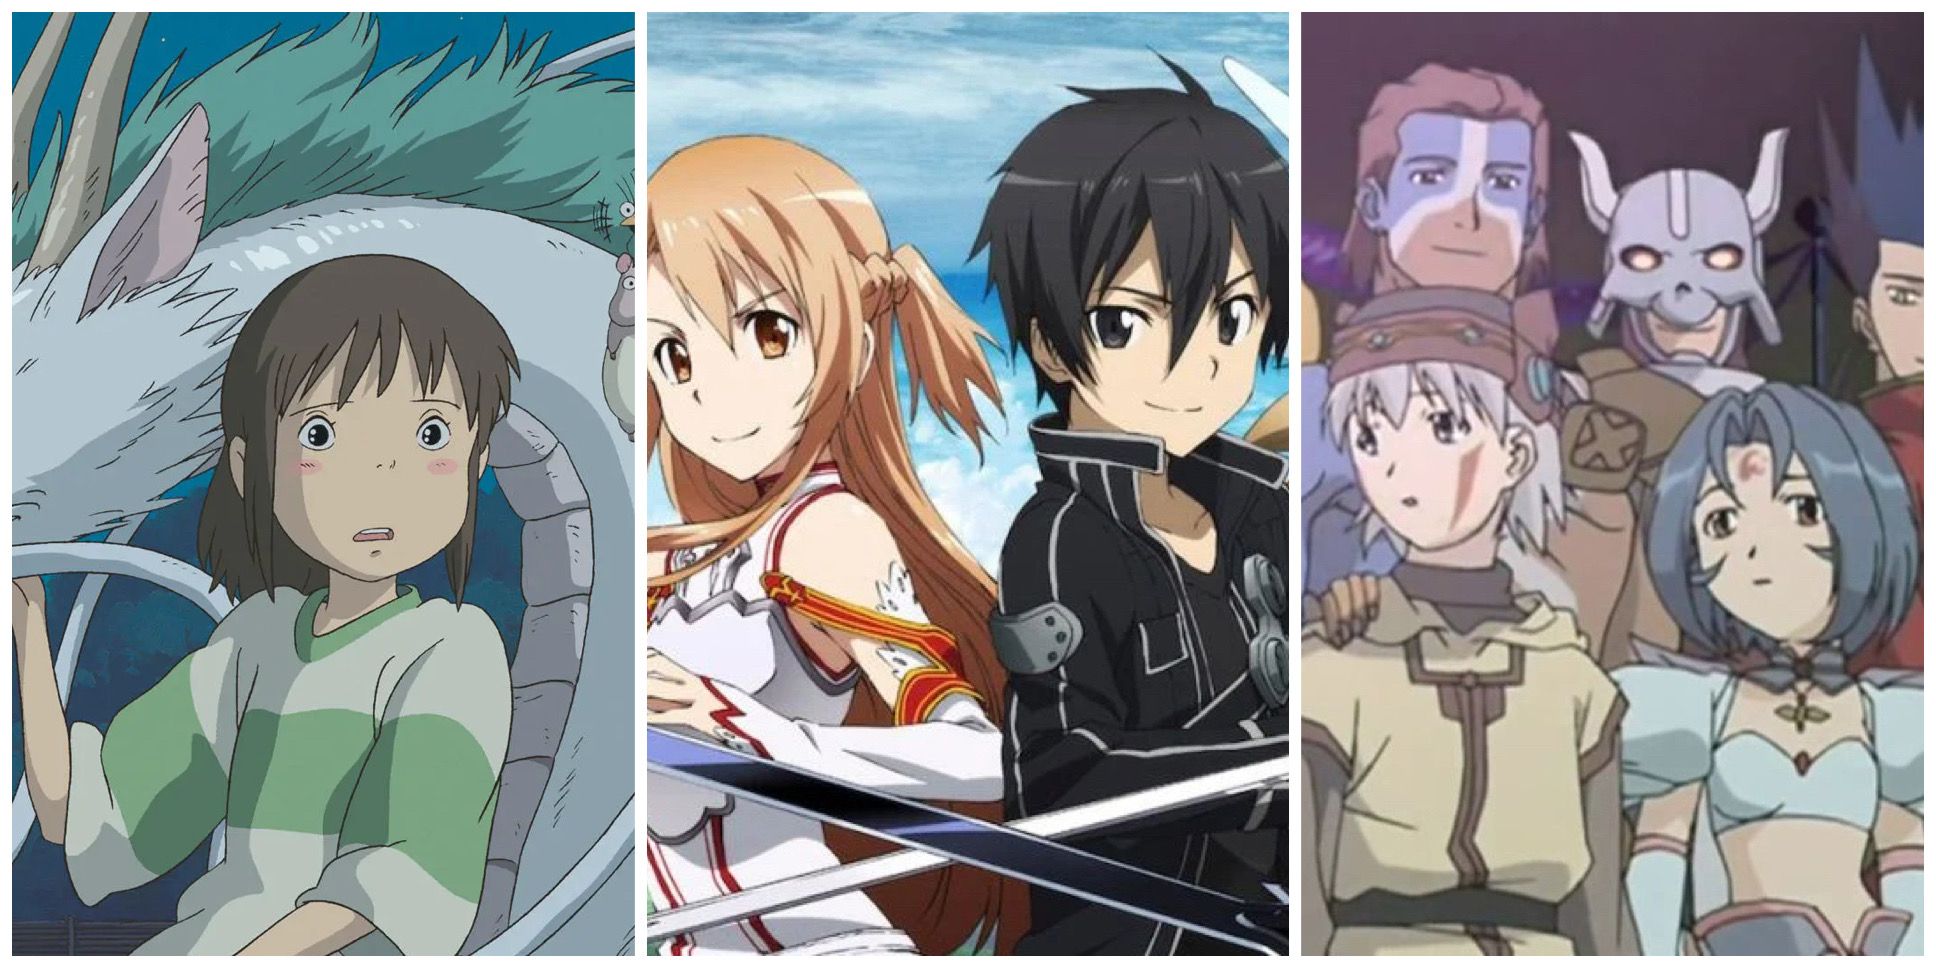 Are 'Sword Art Online' and 'Fairy Tail' worth watching despite poor  reviews? - Quora